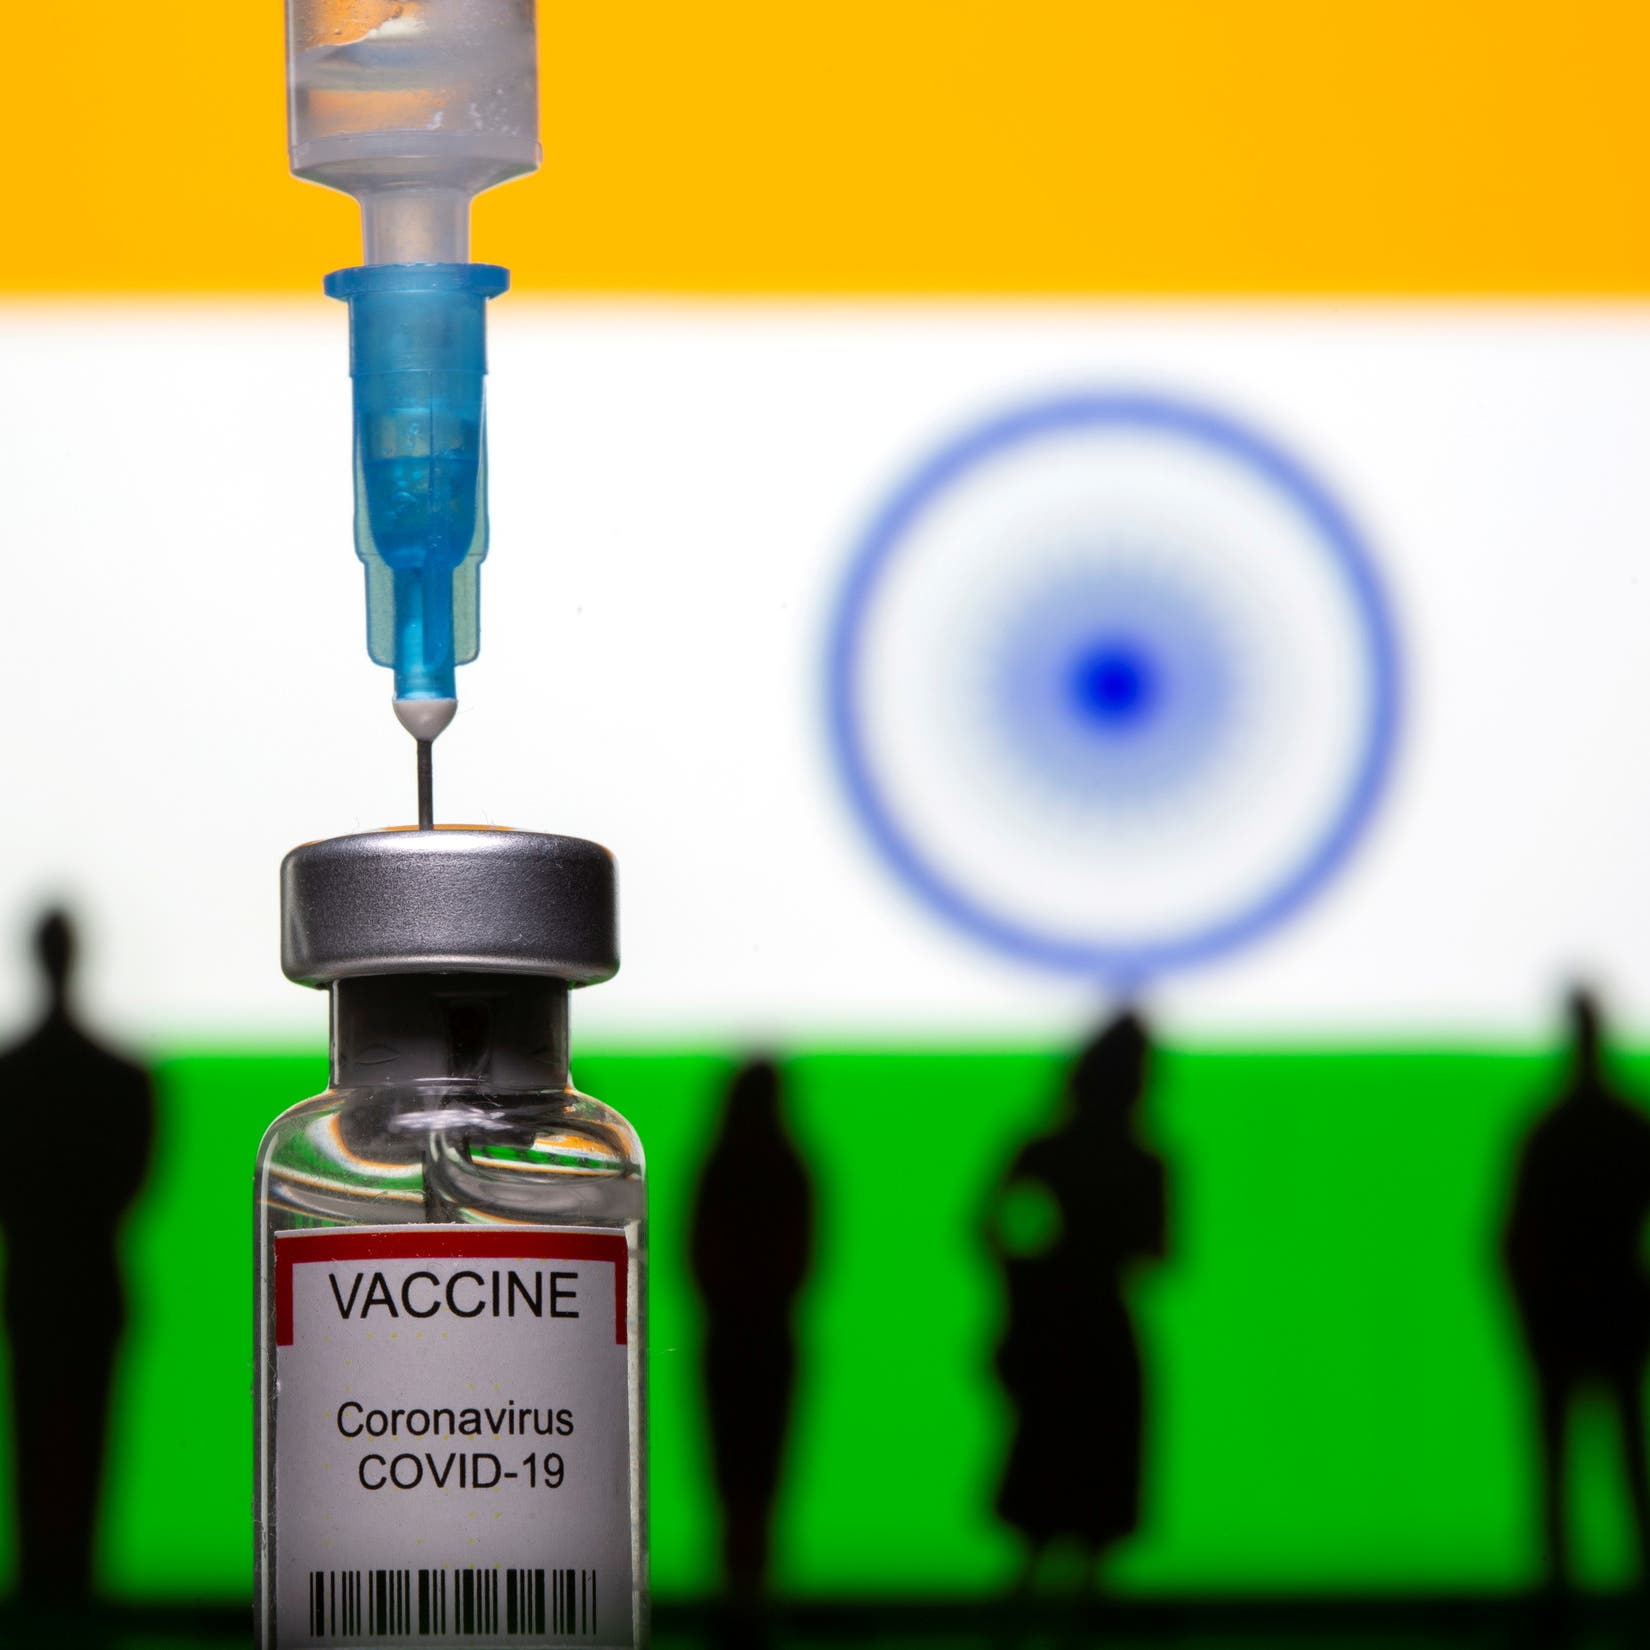 India’s Gennova working on omicron-specific COVID-19 vaccine: Source